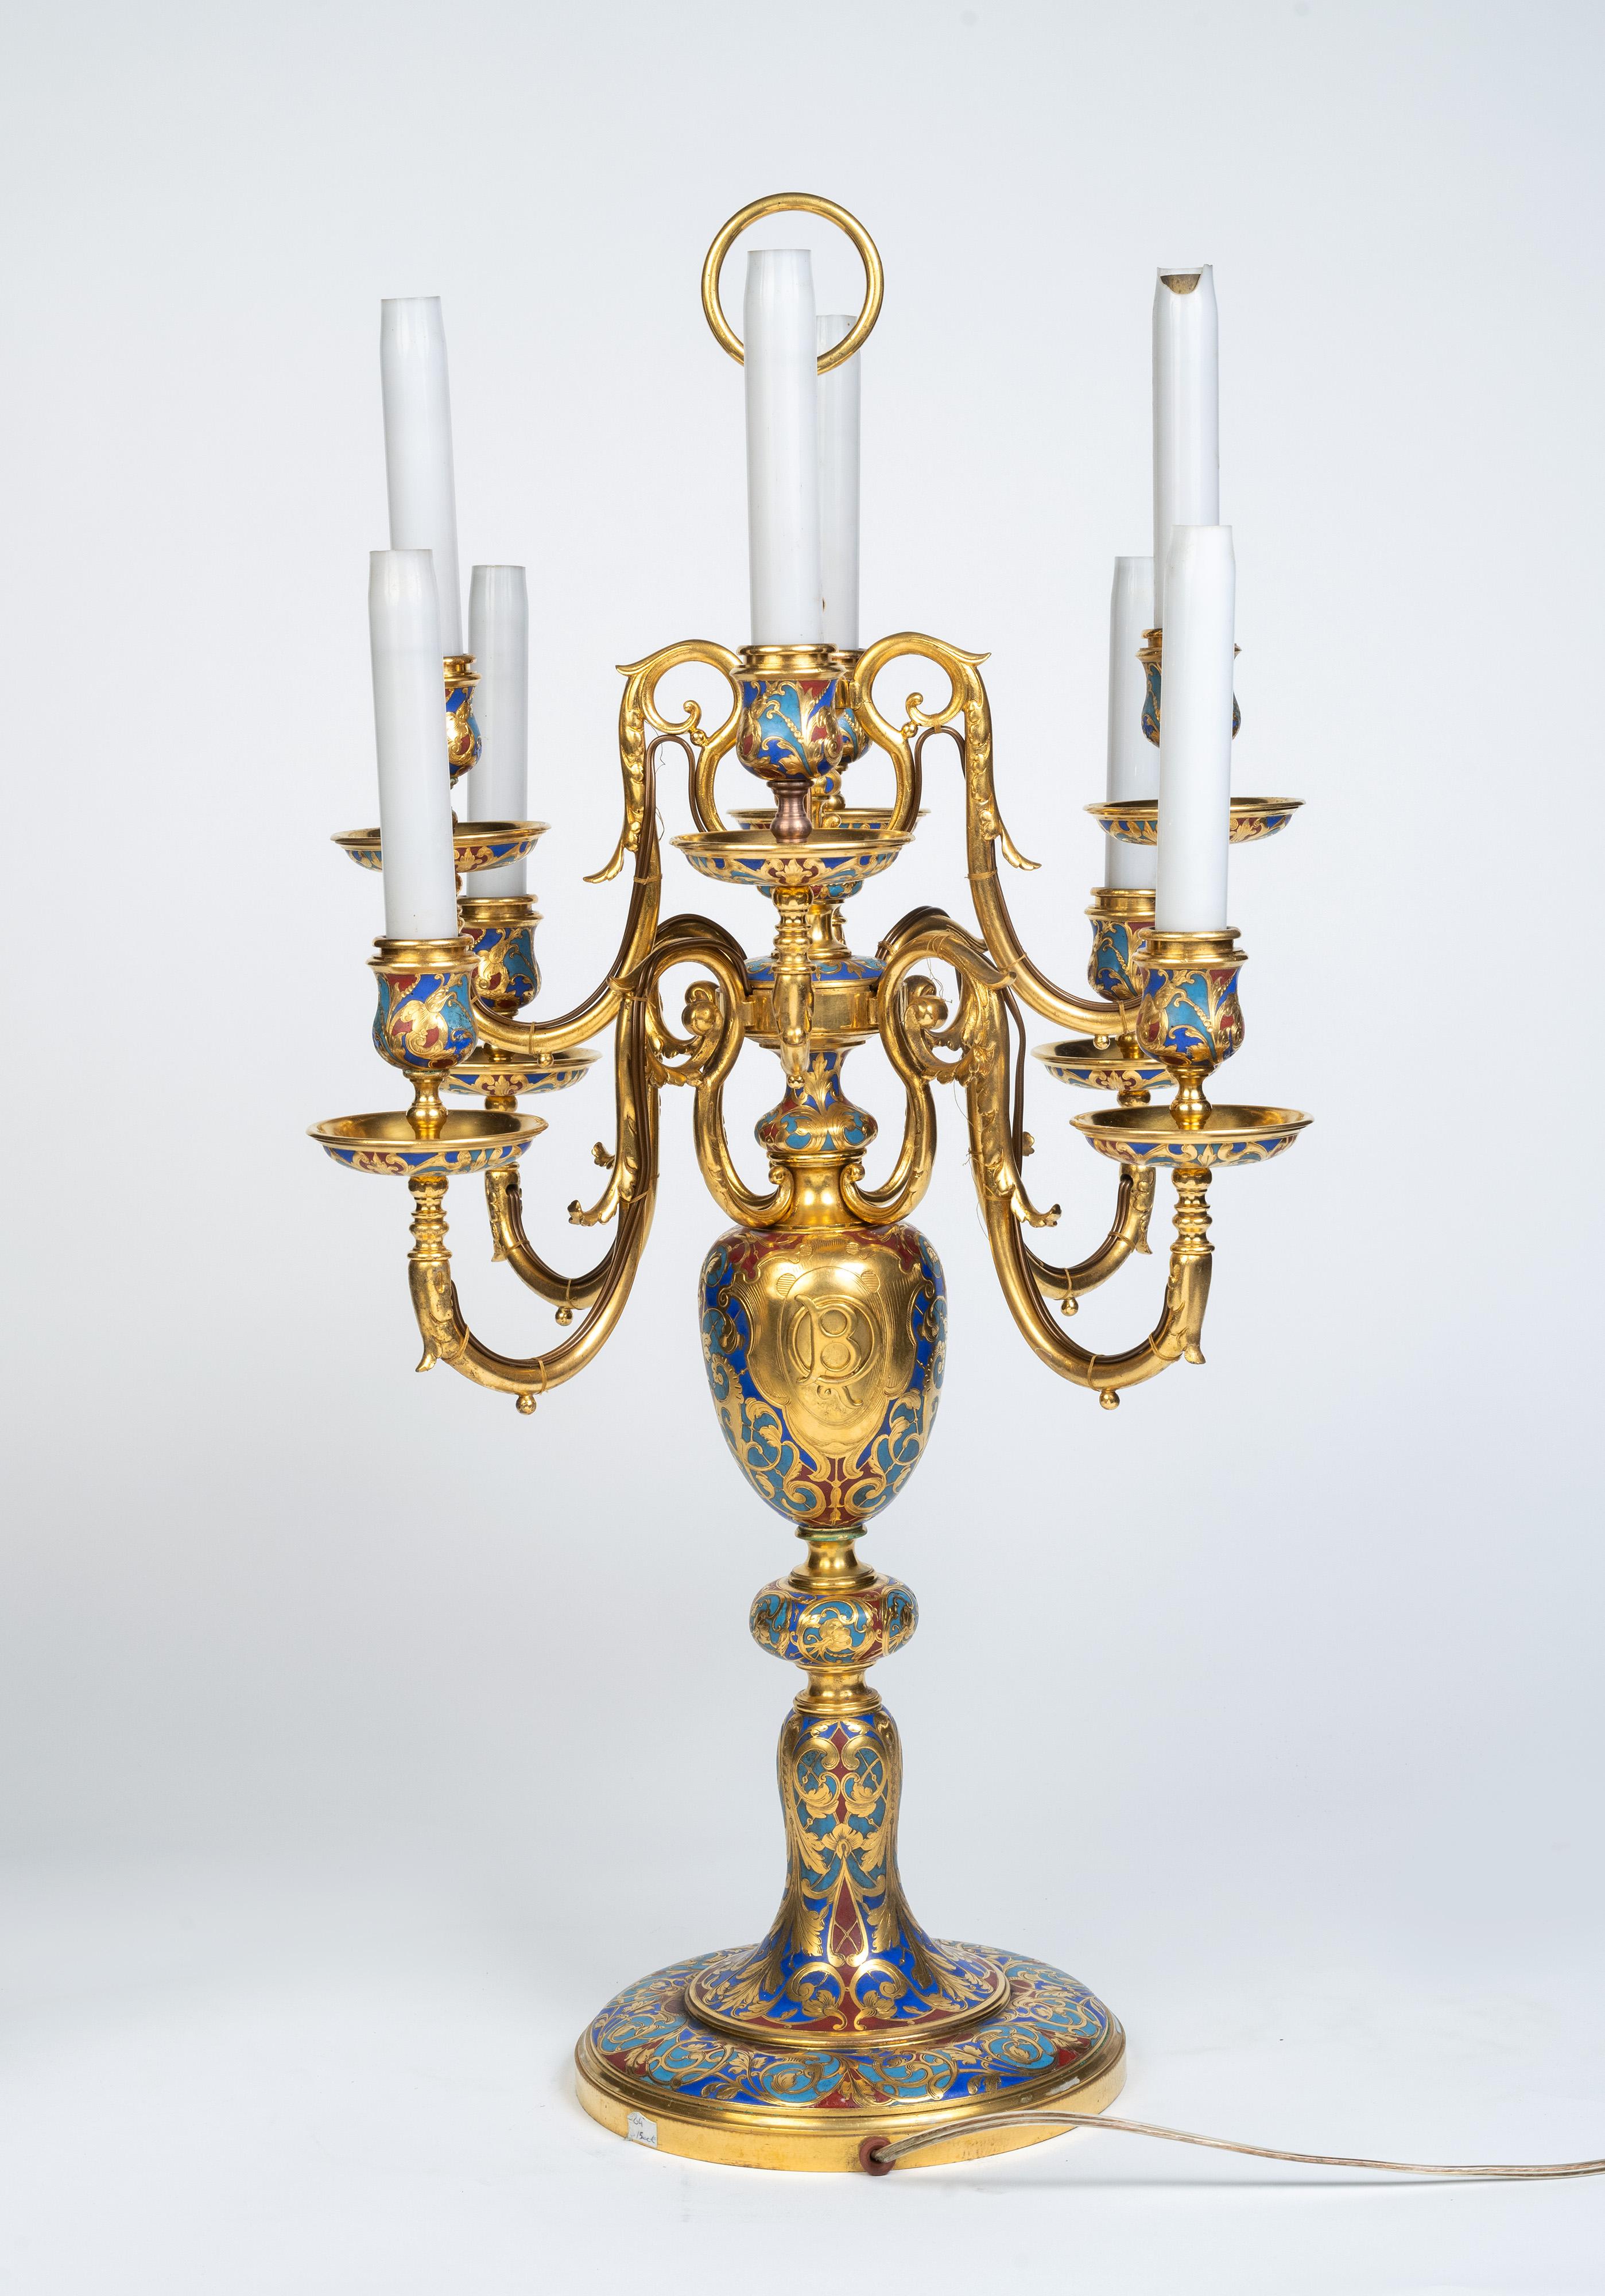 French An Exceptional Pair of Champleve Enamel Ormolu Candelabra by Sevin & Barbedienne For Sale